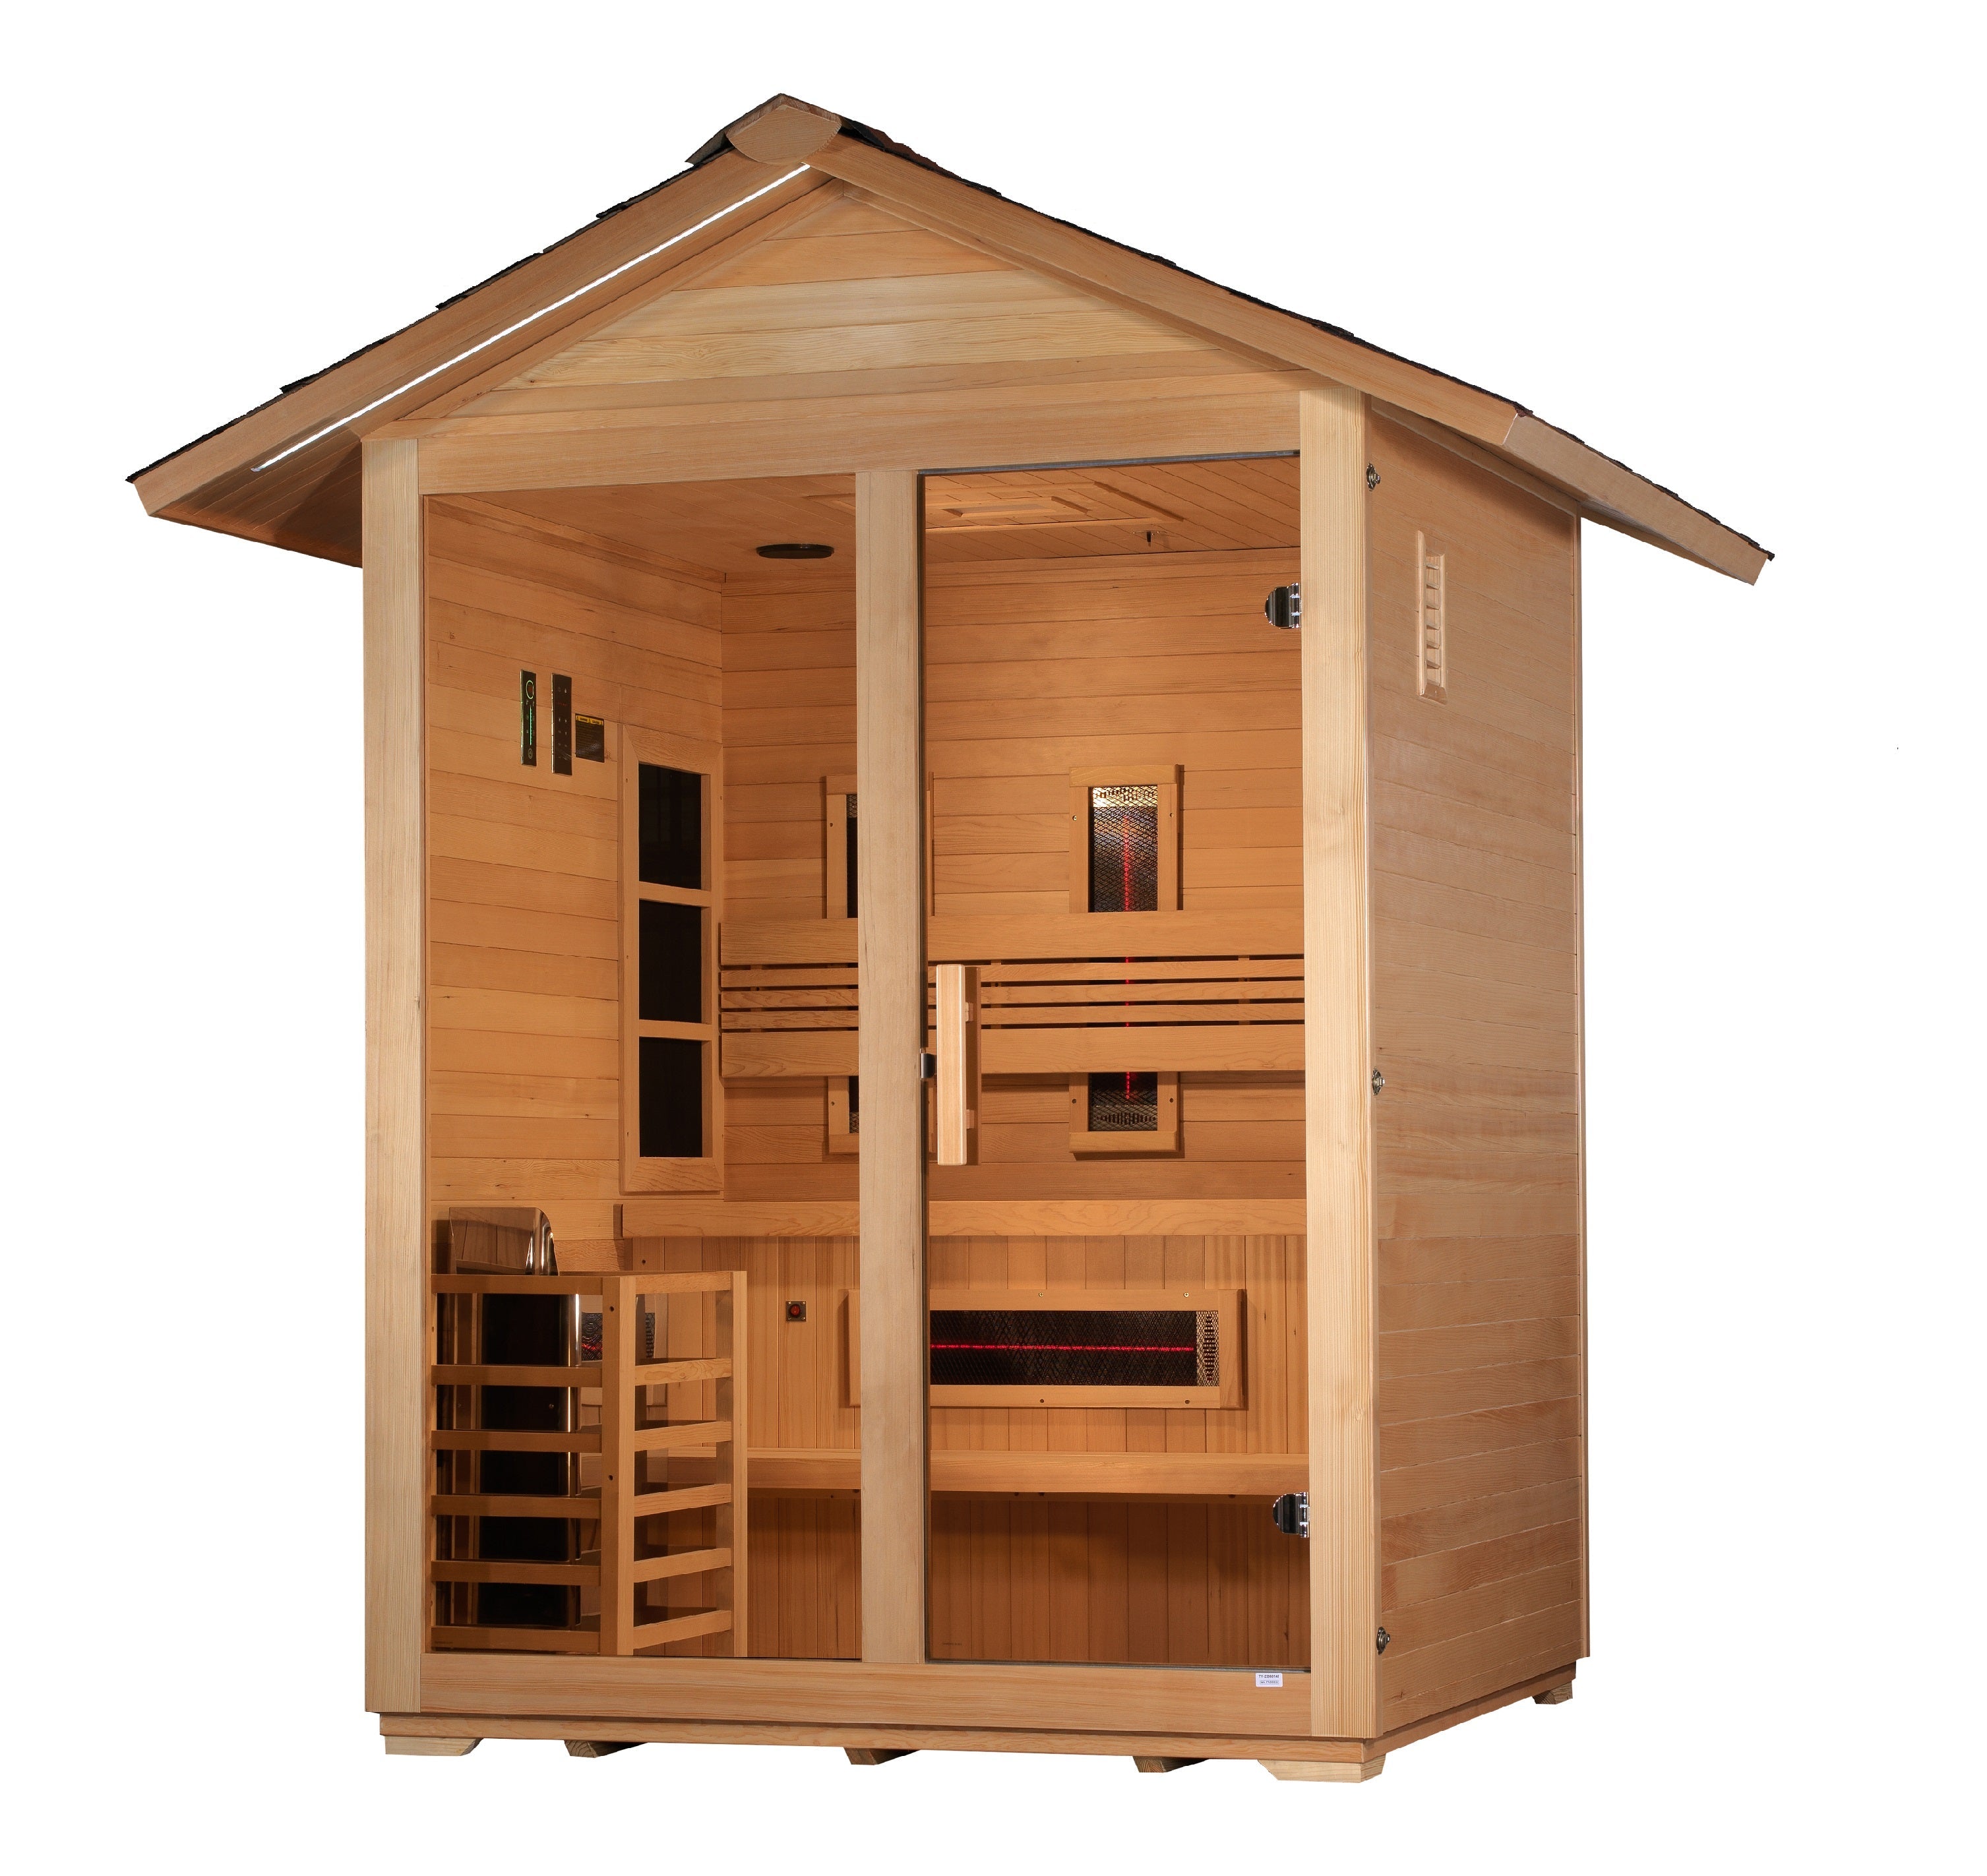 Golden Designs "Carinthia" 3 Person Hybrid (PureTech™ Full Spectrum IR or Traditional Stove) Outdoor Sauna (Heater Included)  Golden Designs Saunas   